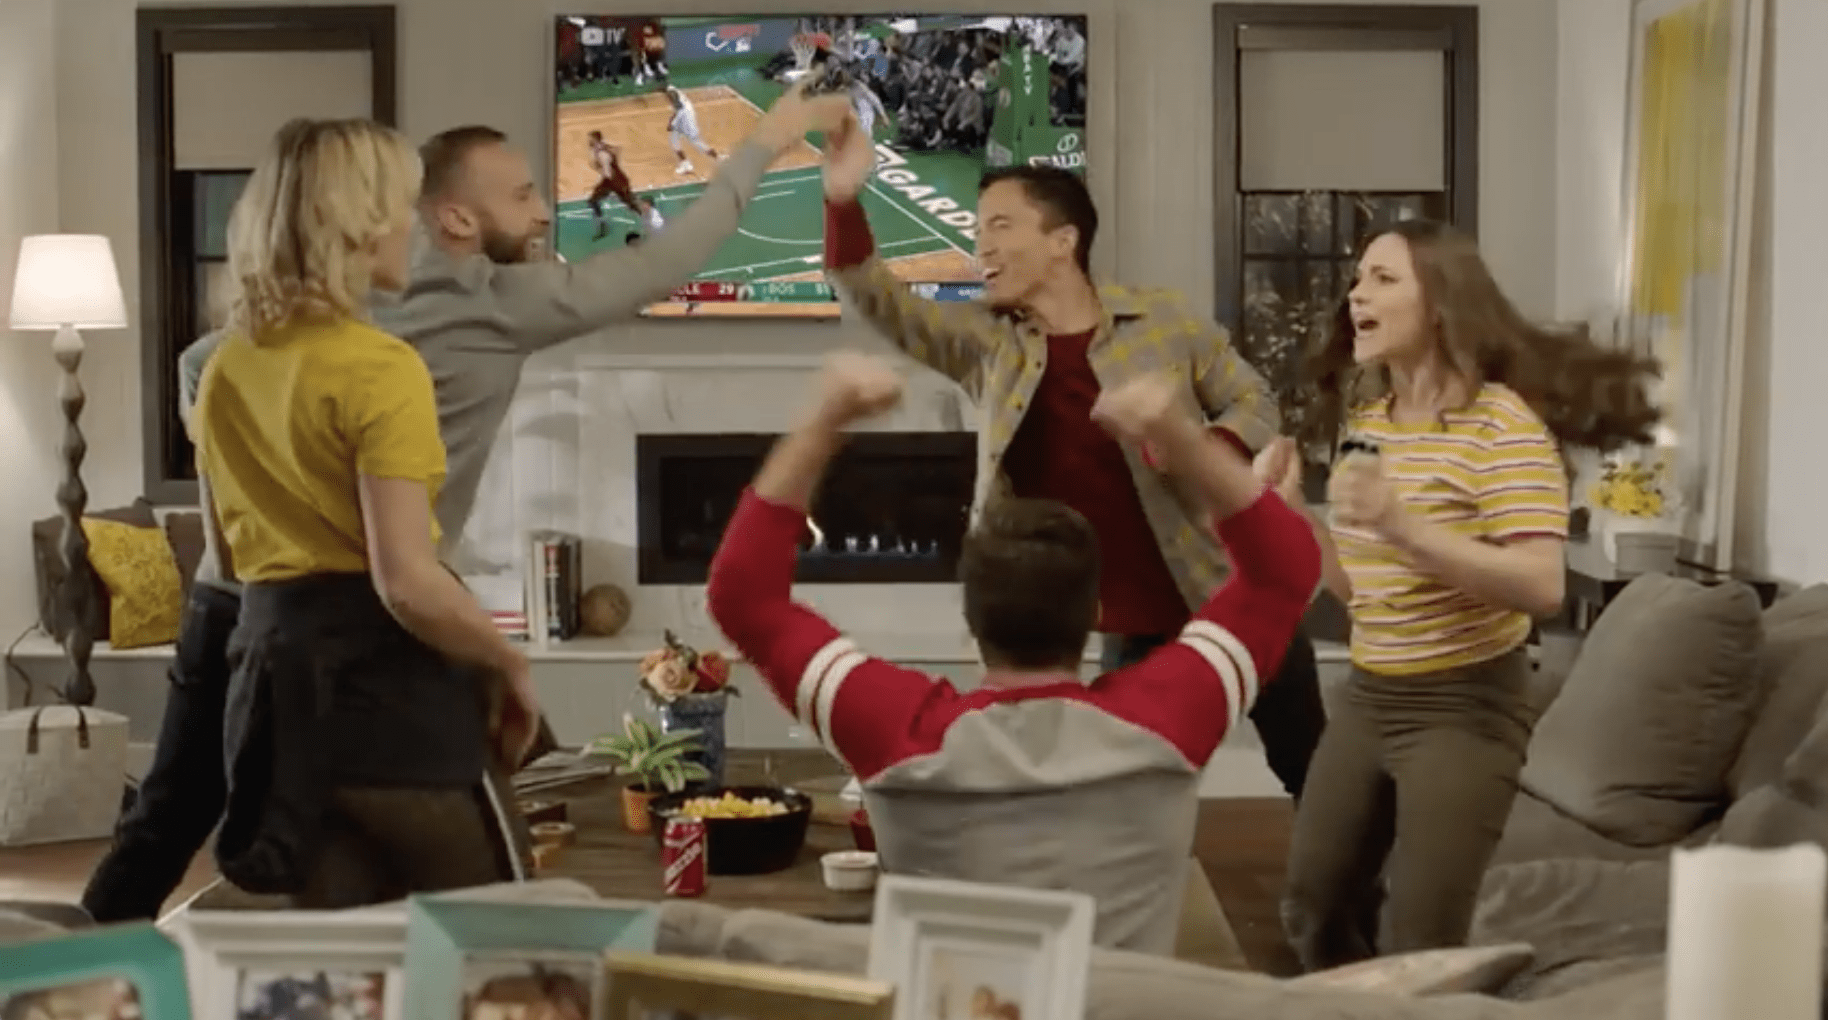 group celebrates after basketball score in YouTube commercial